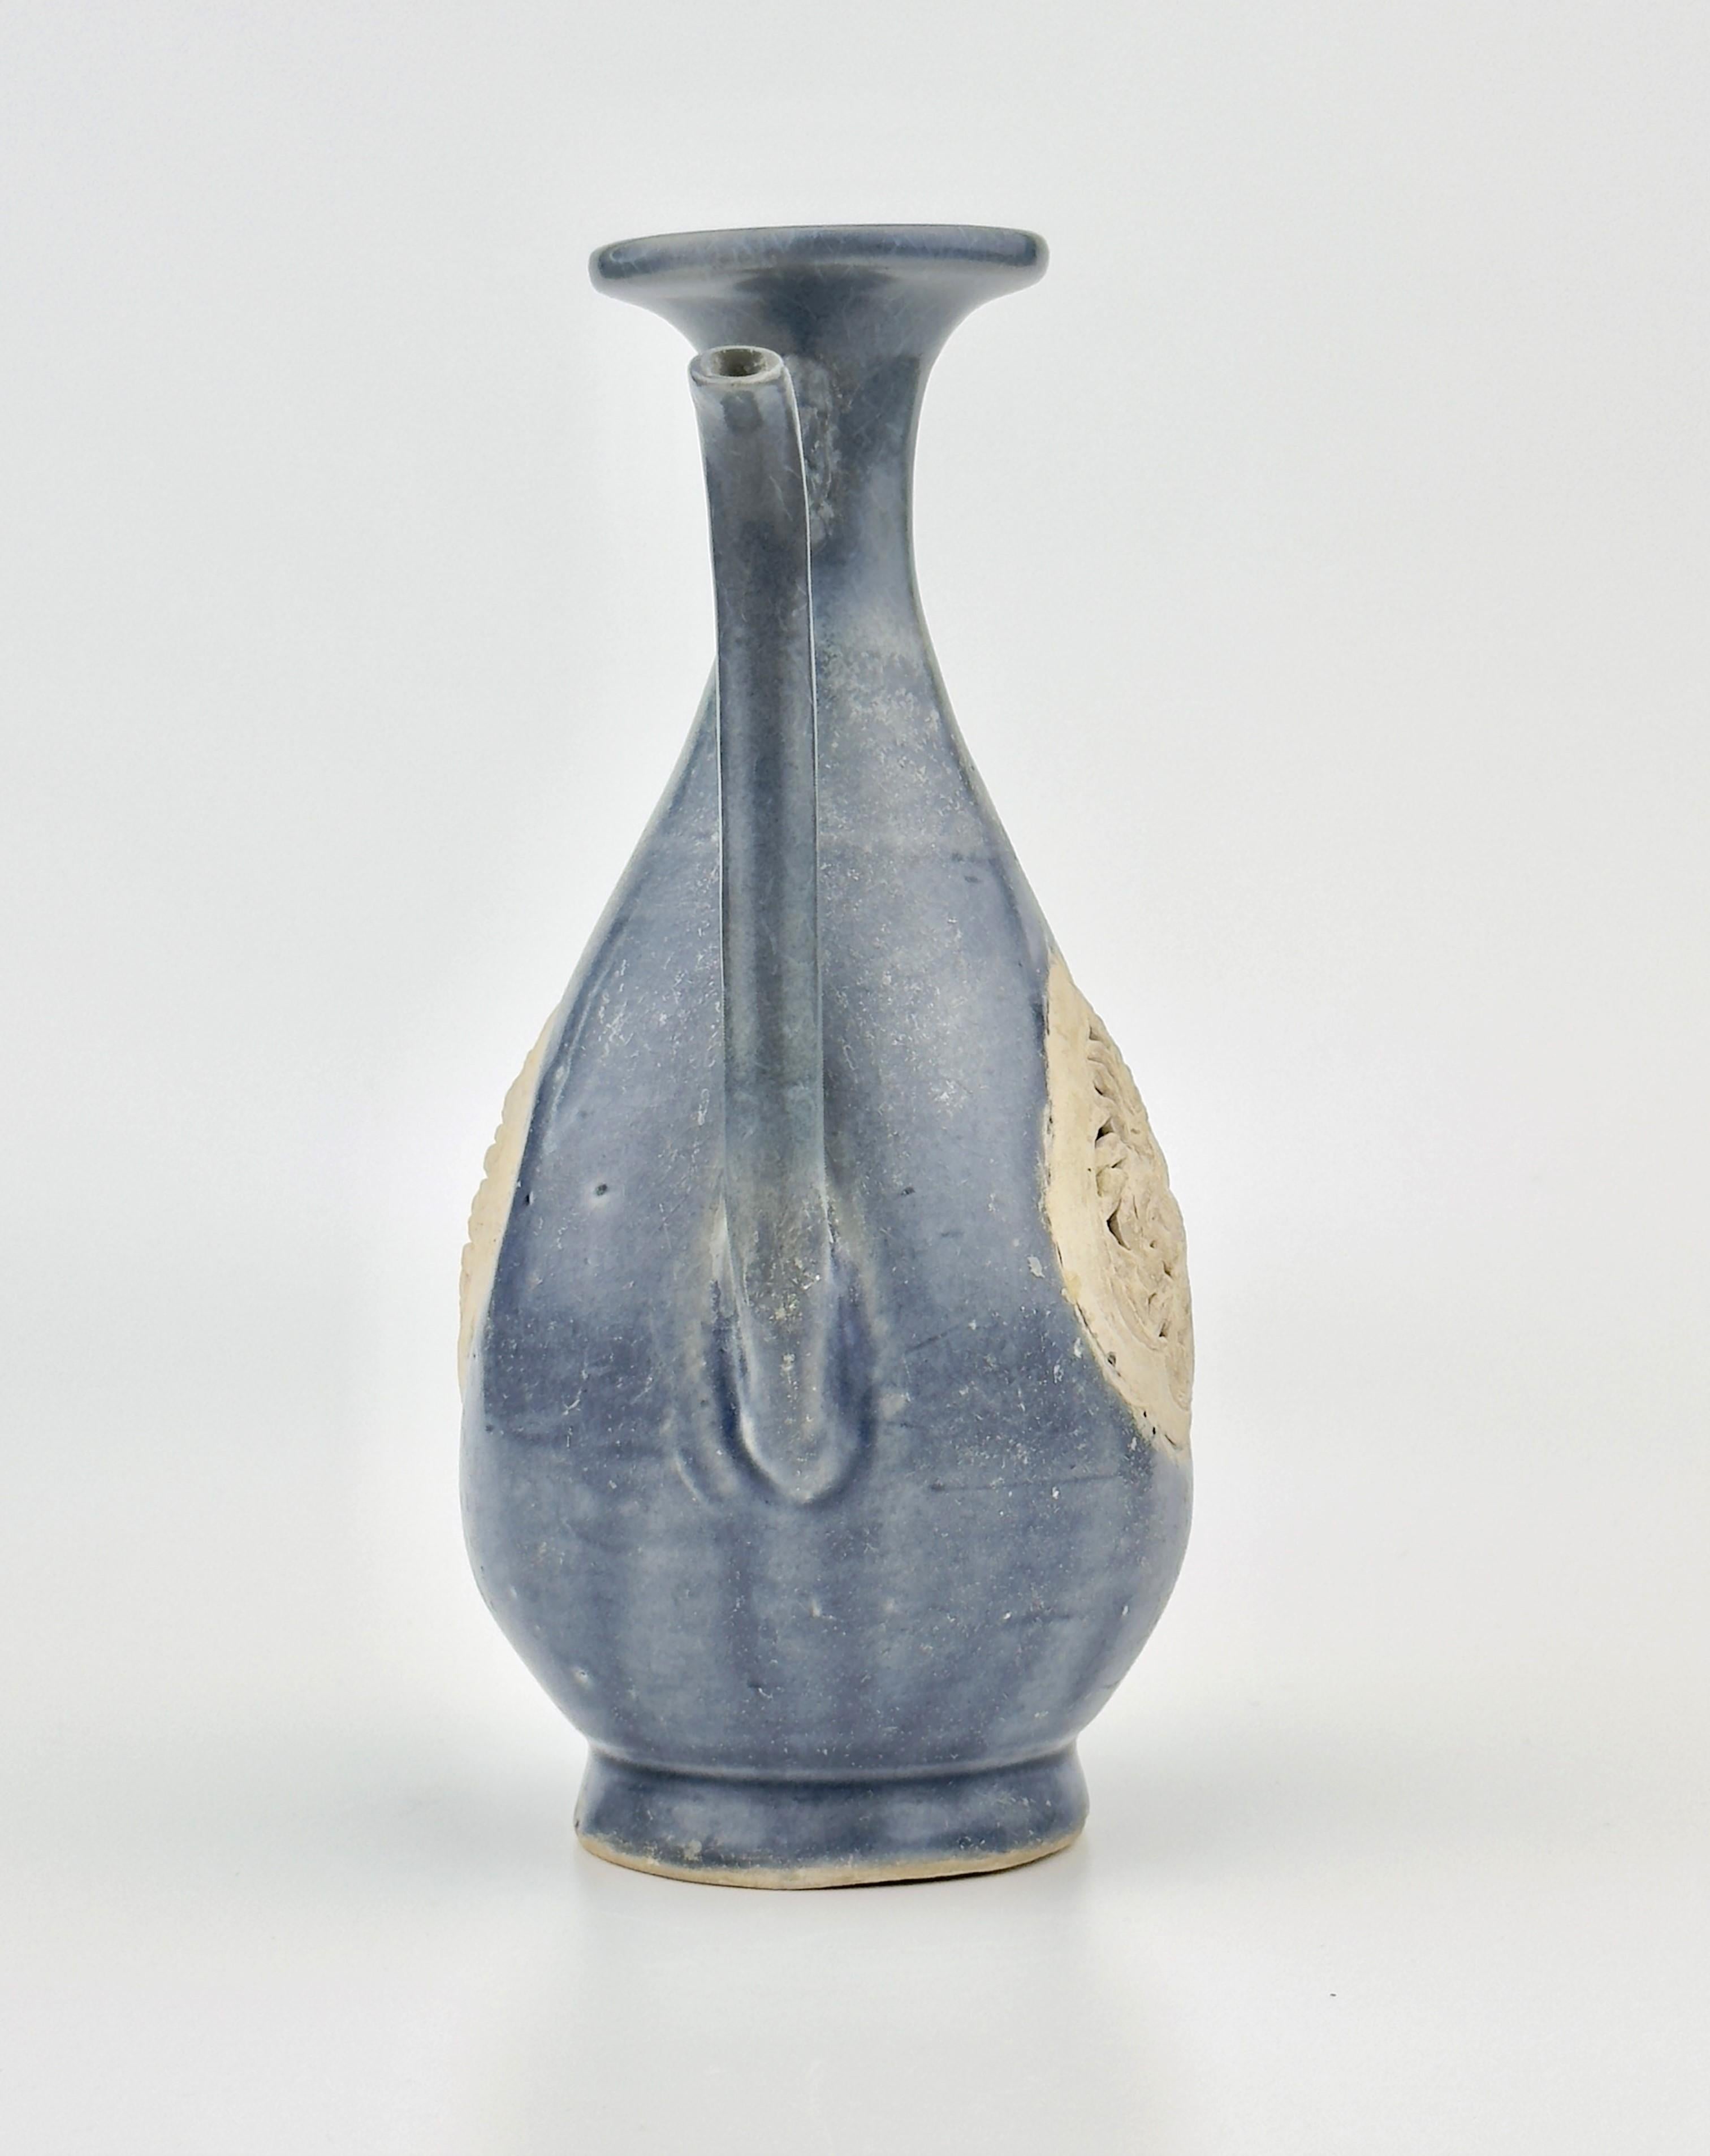 Stoneware painted with underglaze cobalt blue and remnants of overglaze enamel. Valuable piece housed in a few major museum collections in the United States.

Year/Period : 15th century
Region : North Vietnam
Type : Ewer
Found/Acquired : Southeast